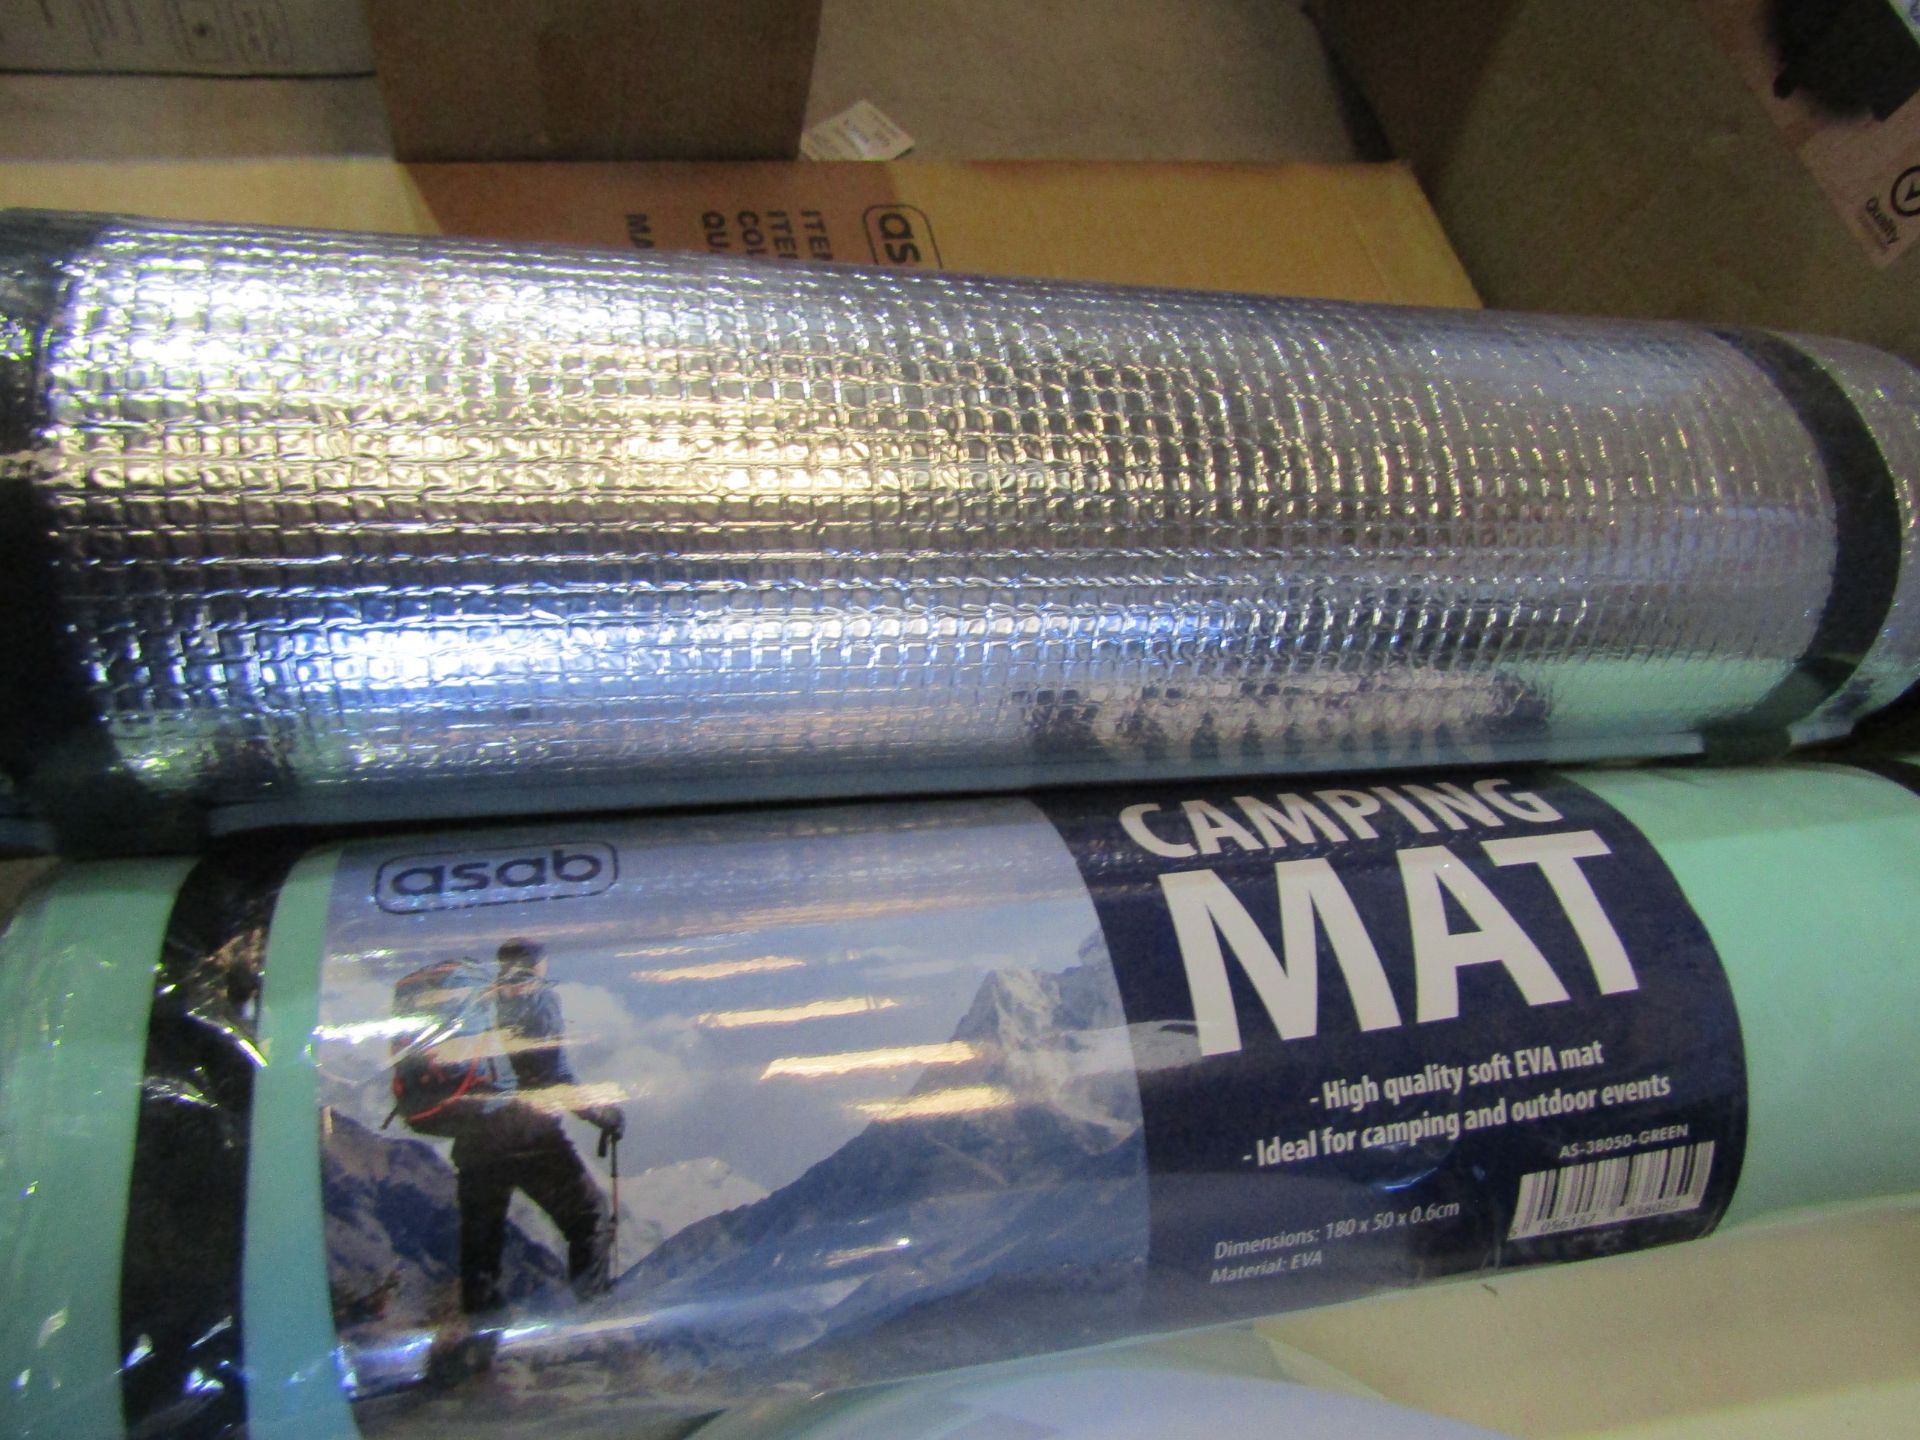 2x Asab High Quality EVA Camping Mats, Size: 180 x 50 x 0.6cm - Unchecked & Packaged.